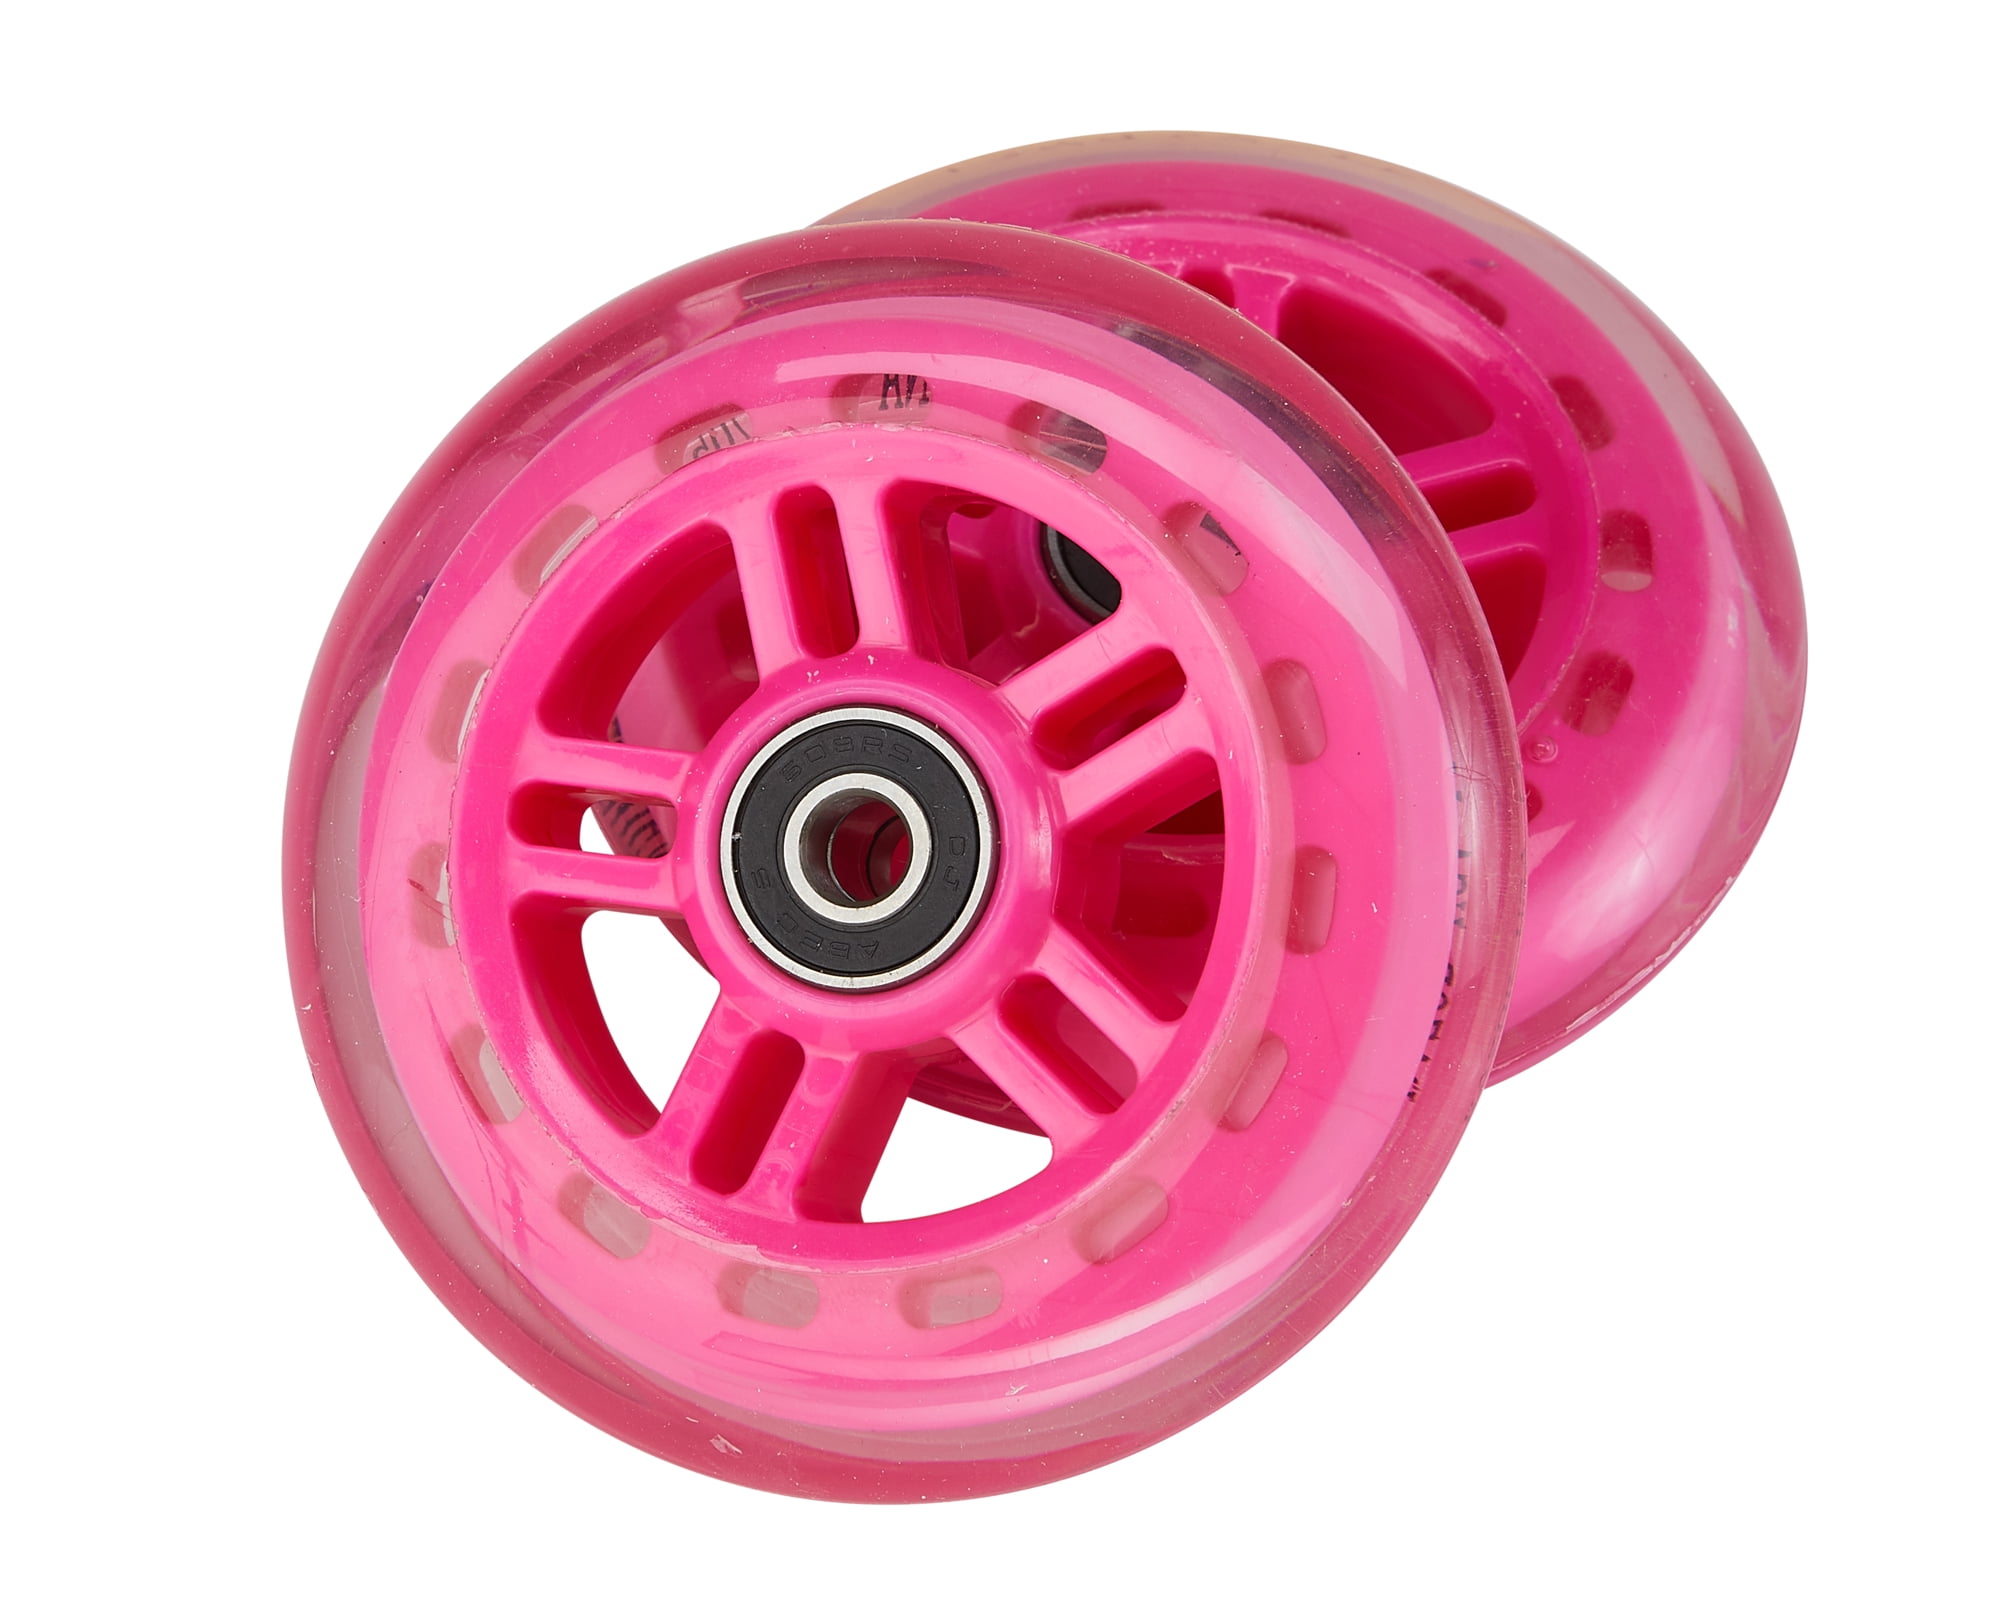 Razor Scooter Wheels 98mm With Bearings 134932 PK for sale online